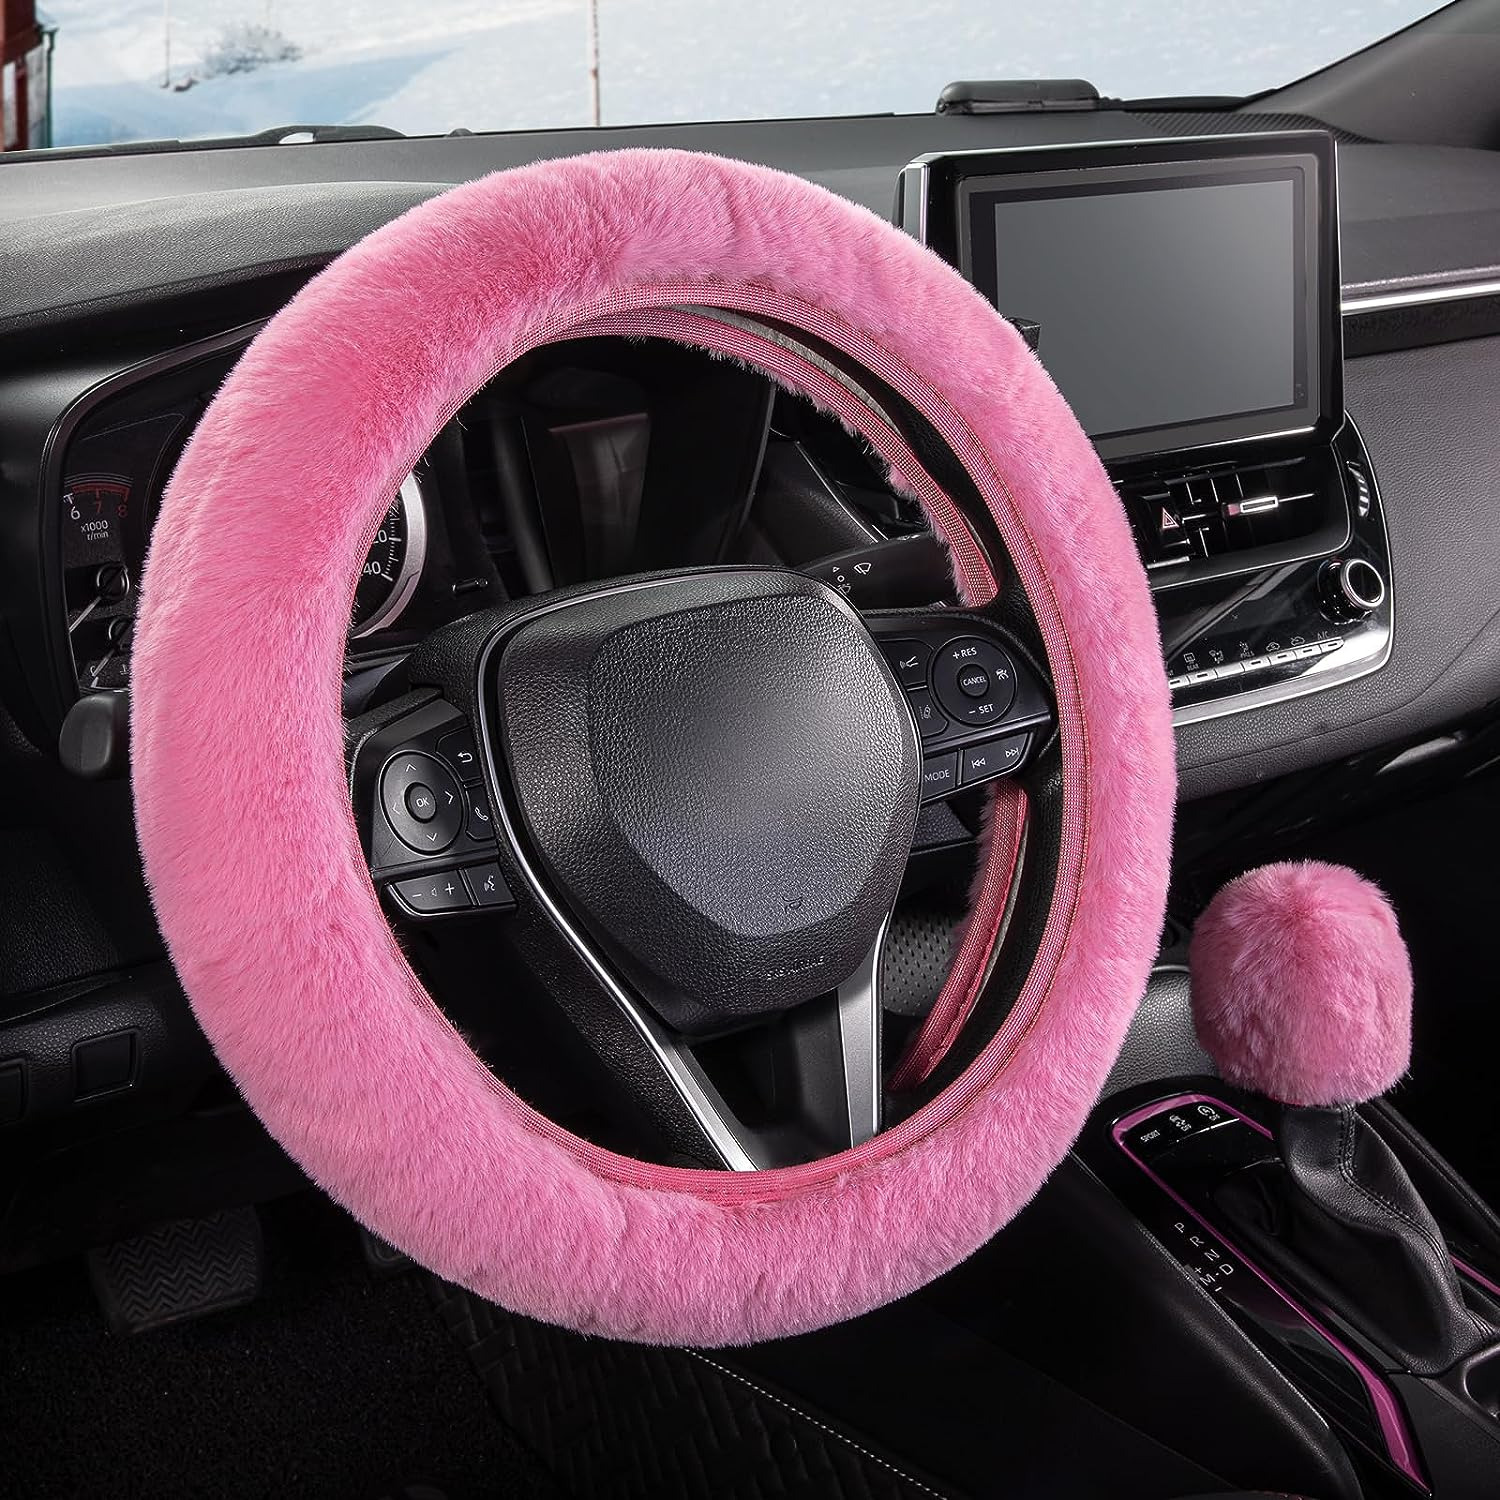 Fluffy Pink Car Steering Wheel and Gear Shift Cover Set - Soft, Warm, and Non-Sl